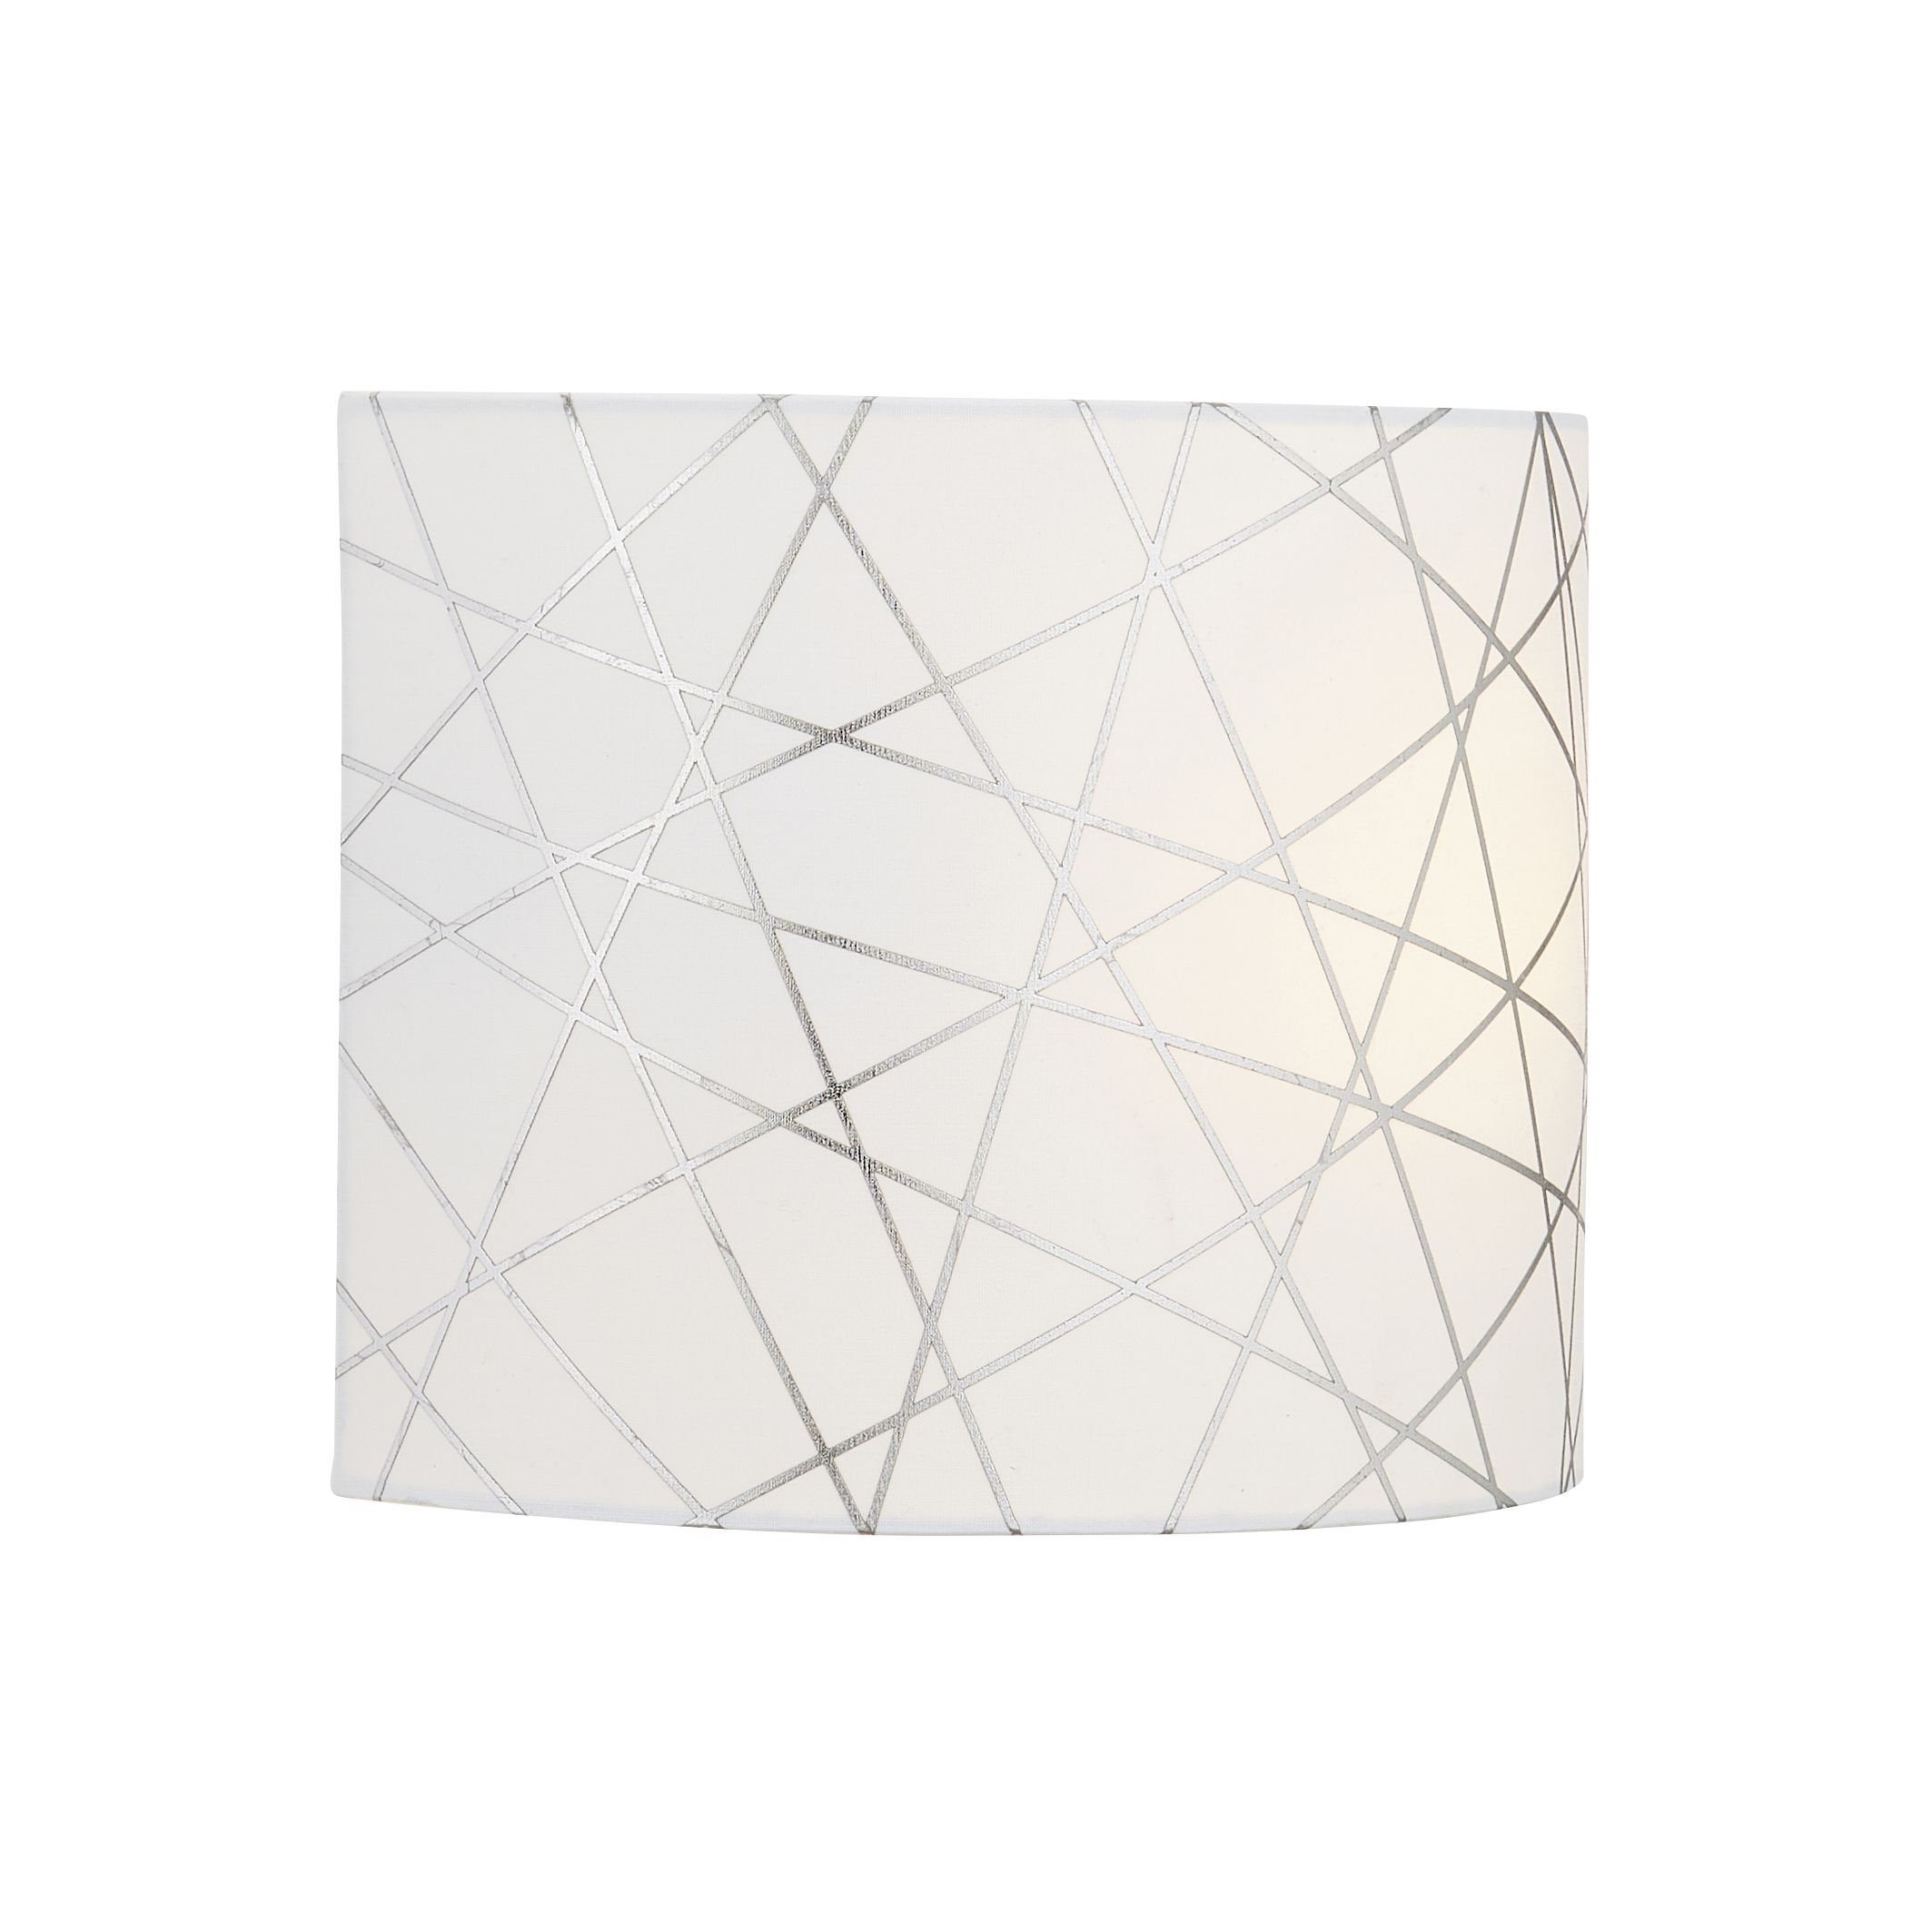 Inlight Carme Foil printed Silver & white Wired LED Wall light